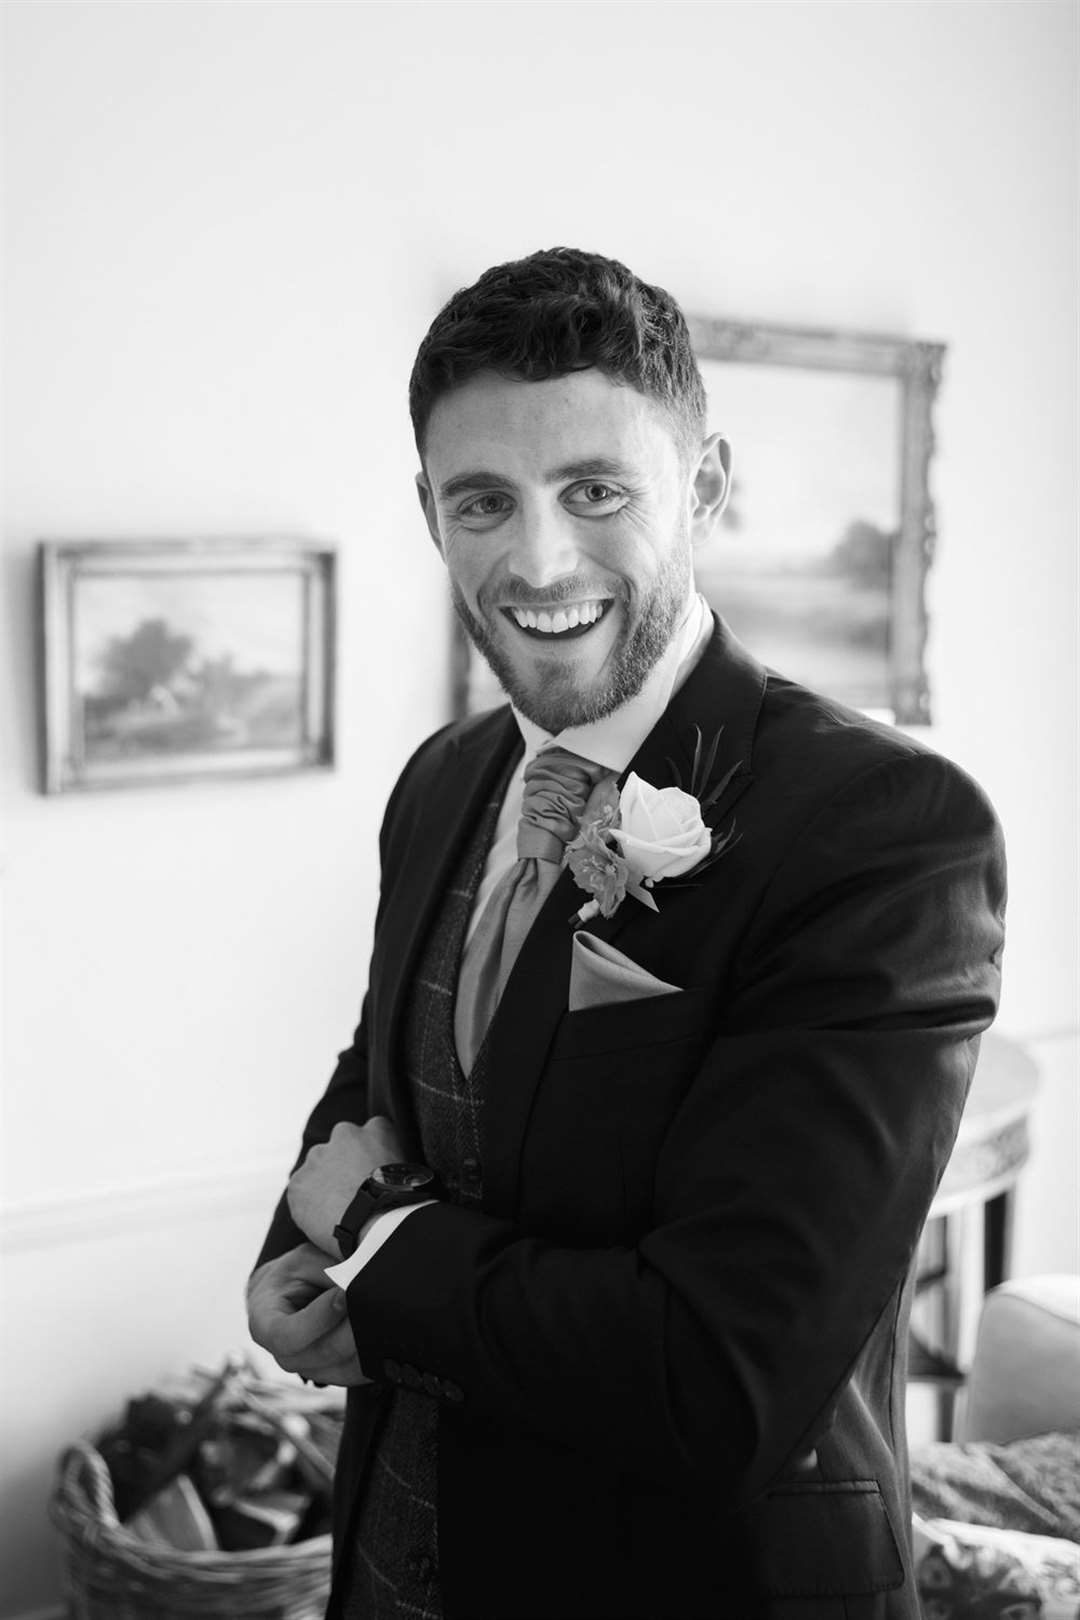 Pc Andrew Harper on his wedding day (Thames Valley Police/PA)